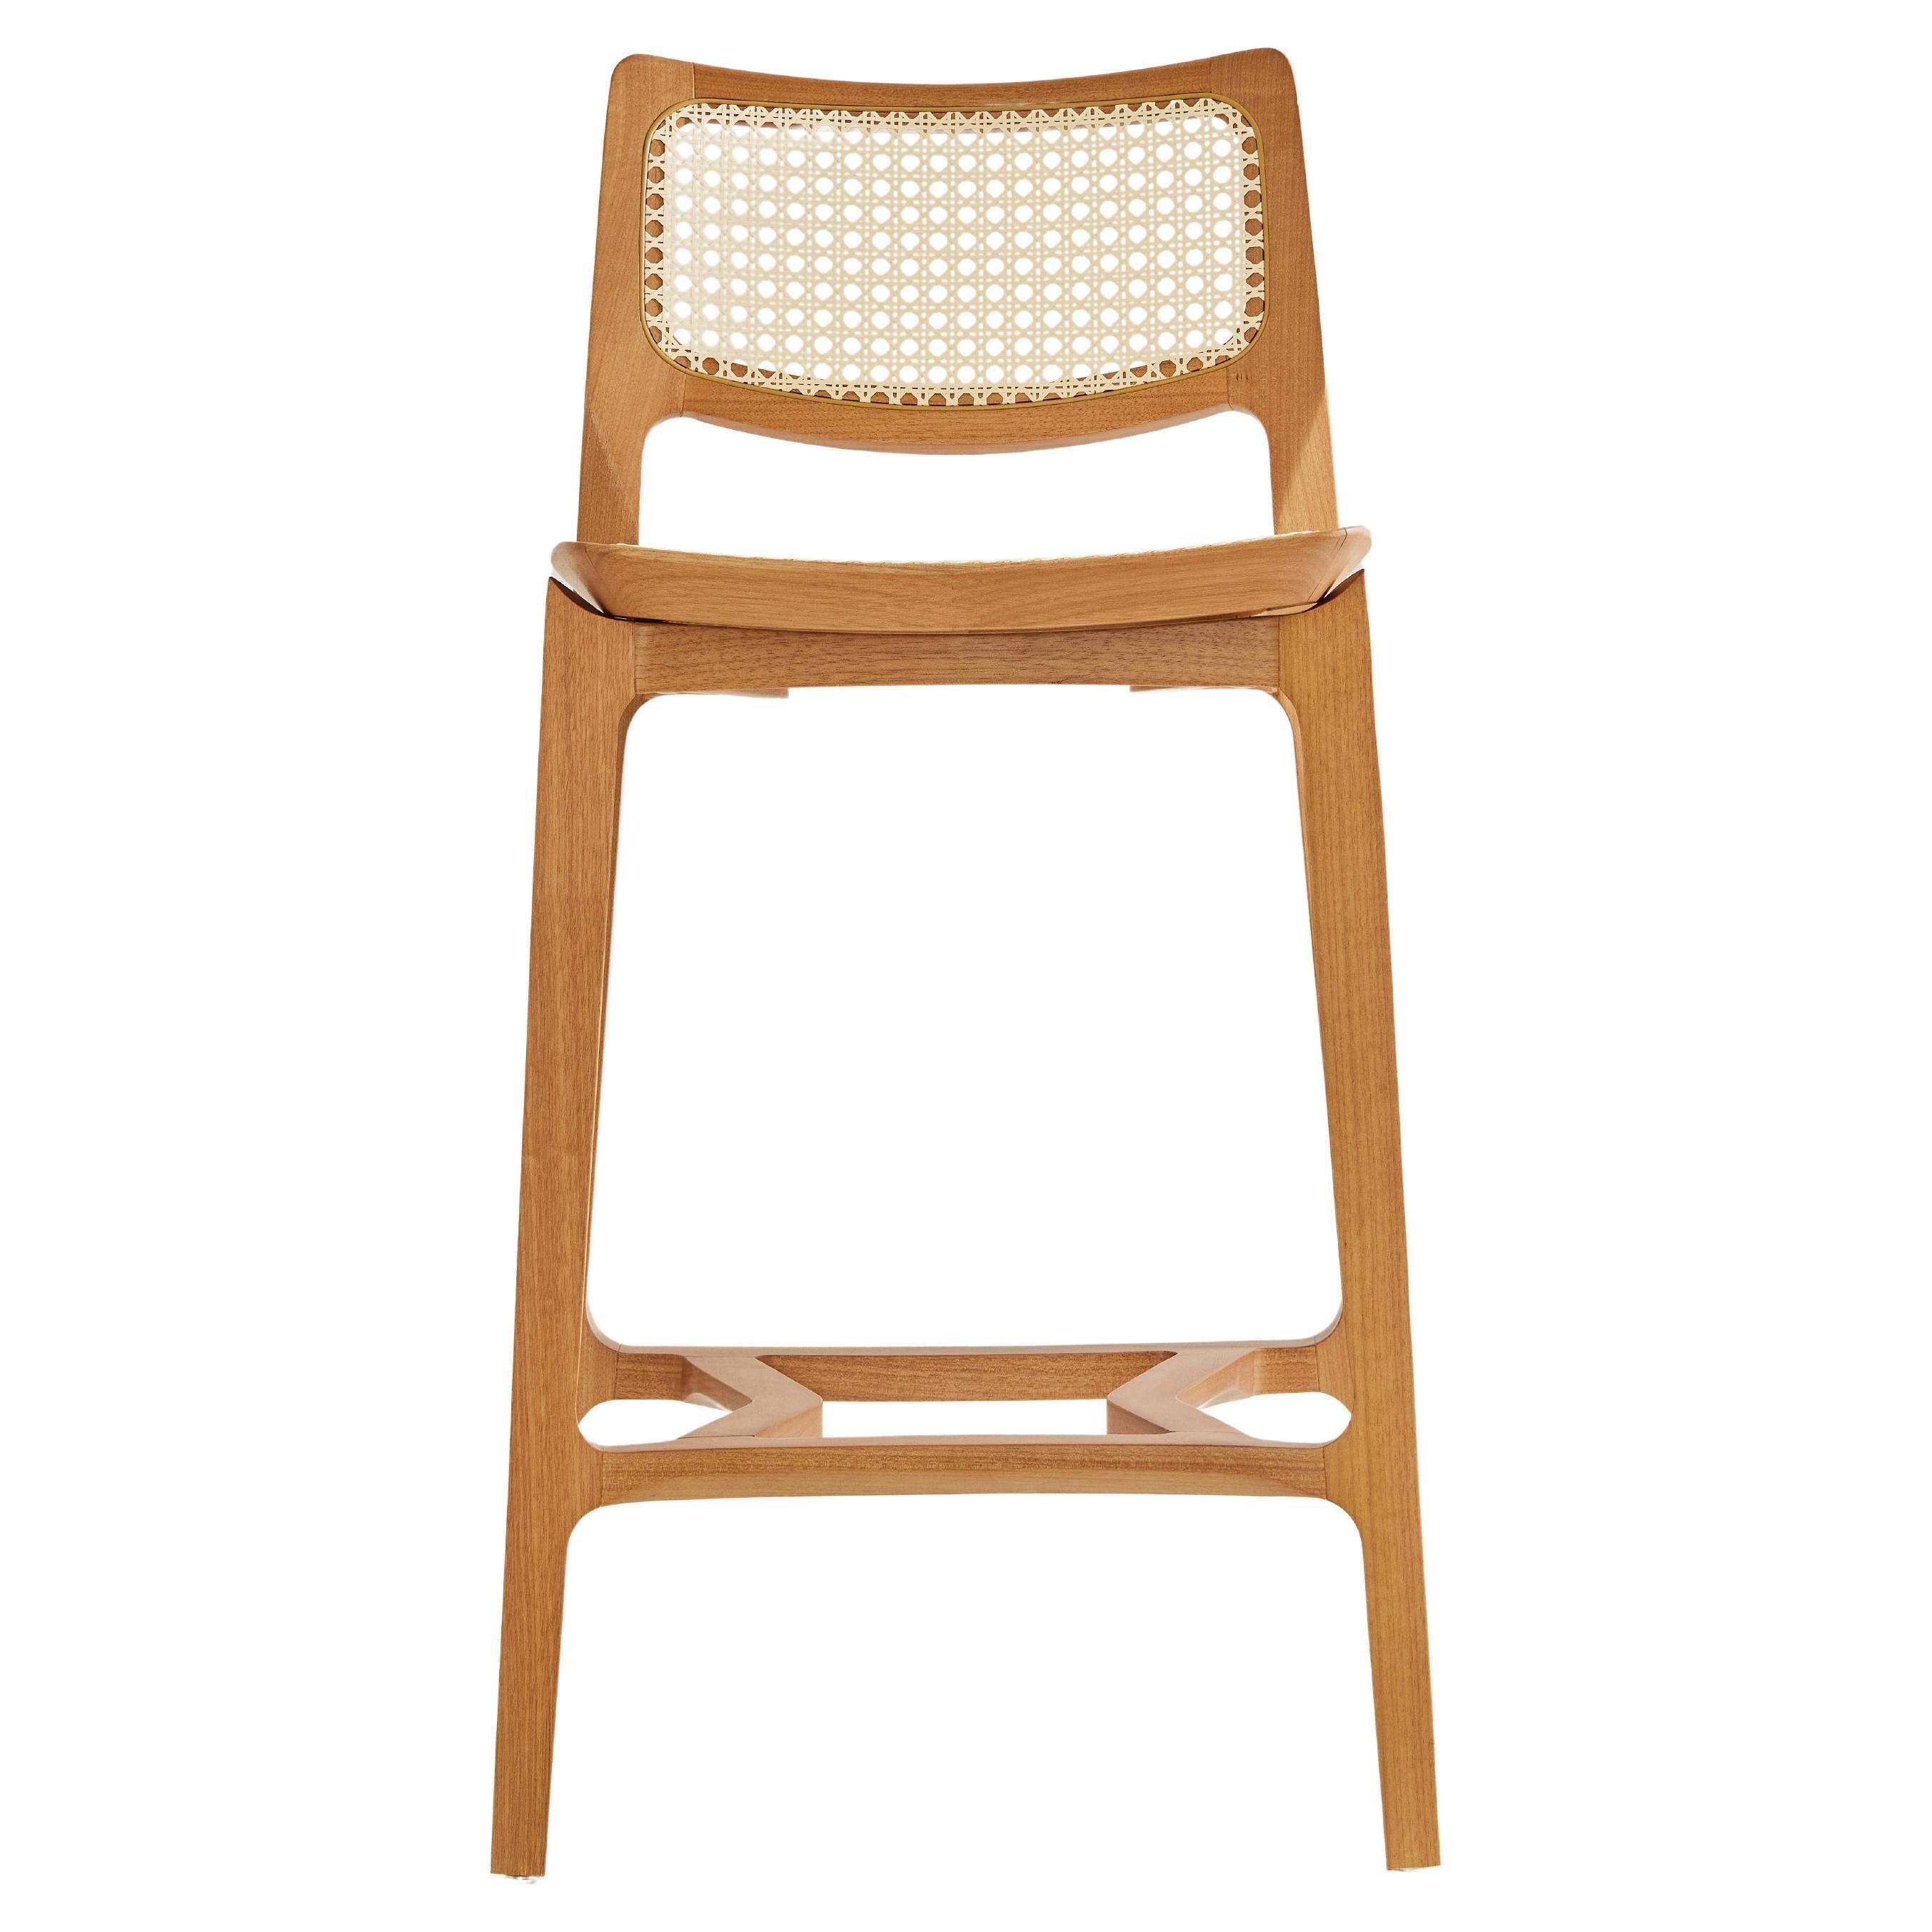 Aurora stool, light honey solid wood, natural caning back, cane seating For Sale